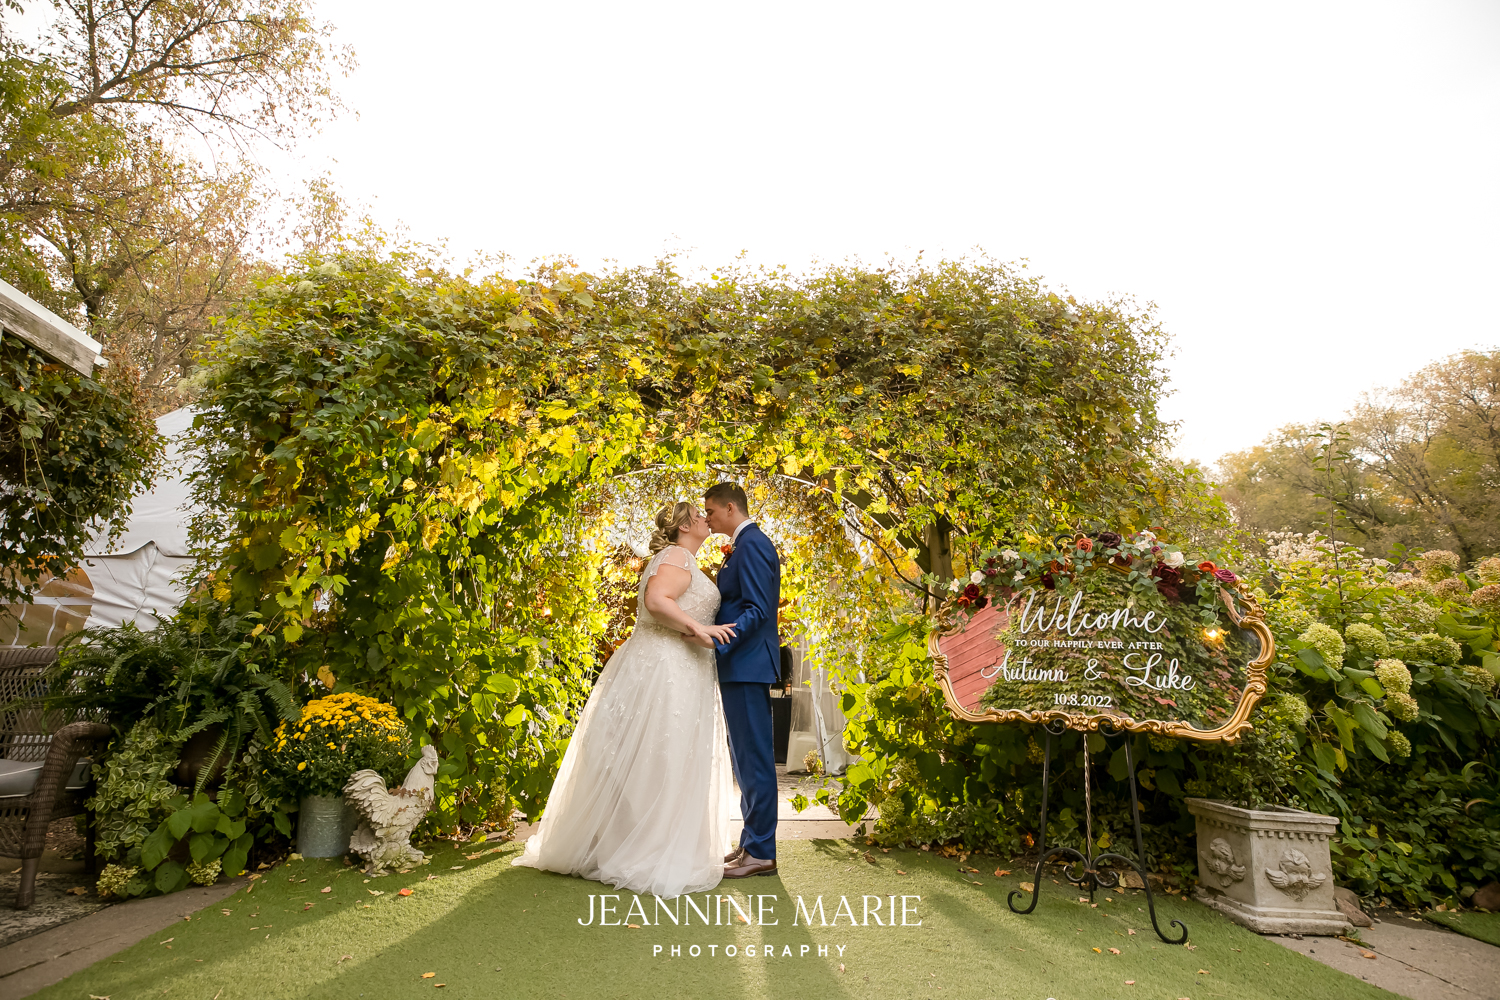 Camrose Hill Farm wedding photographed by Minnesota wedding photographer Jeannine Marie Photography